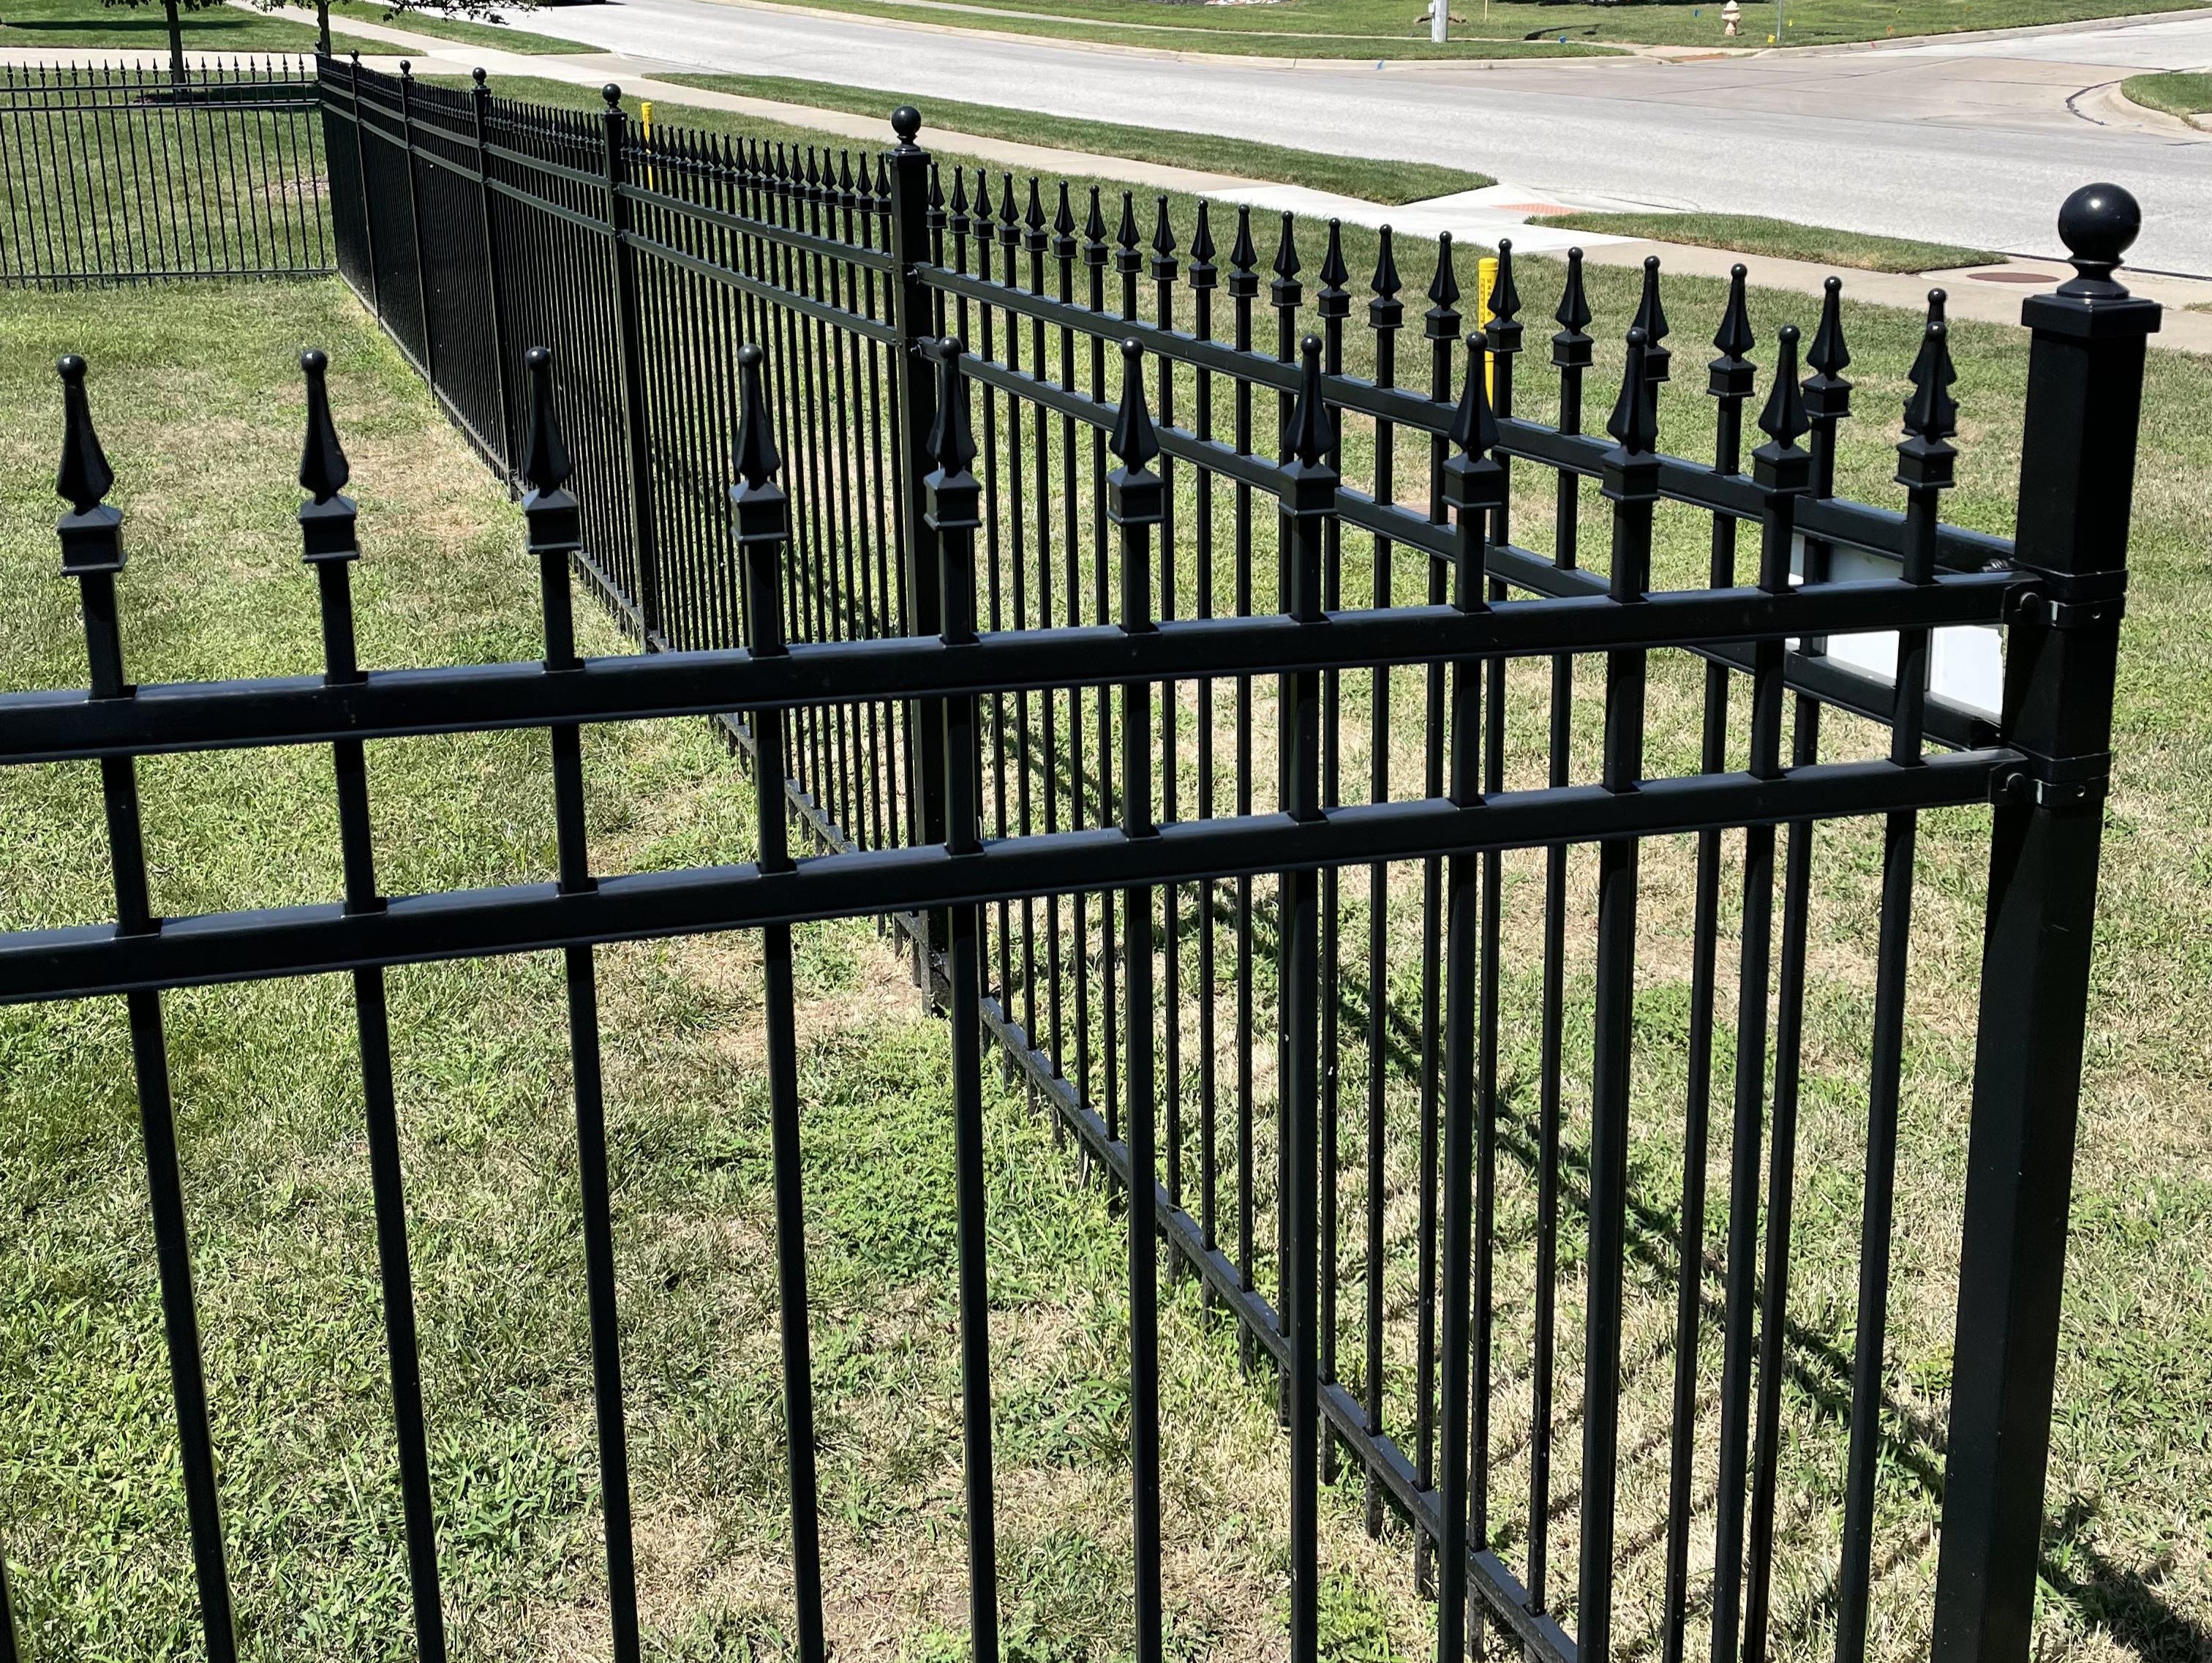 steel fence with pointed top showing how straight it is for 30 feet